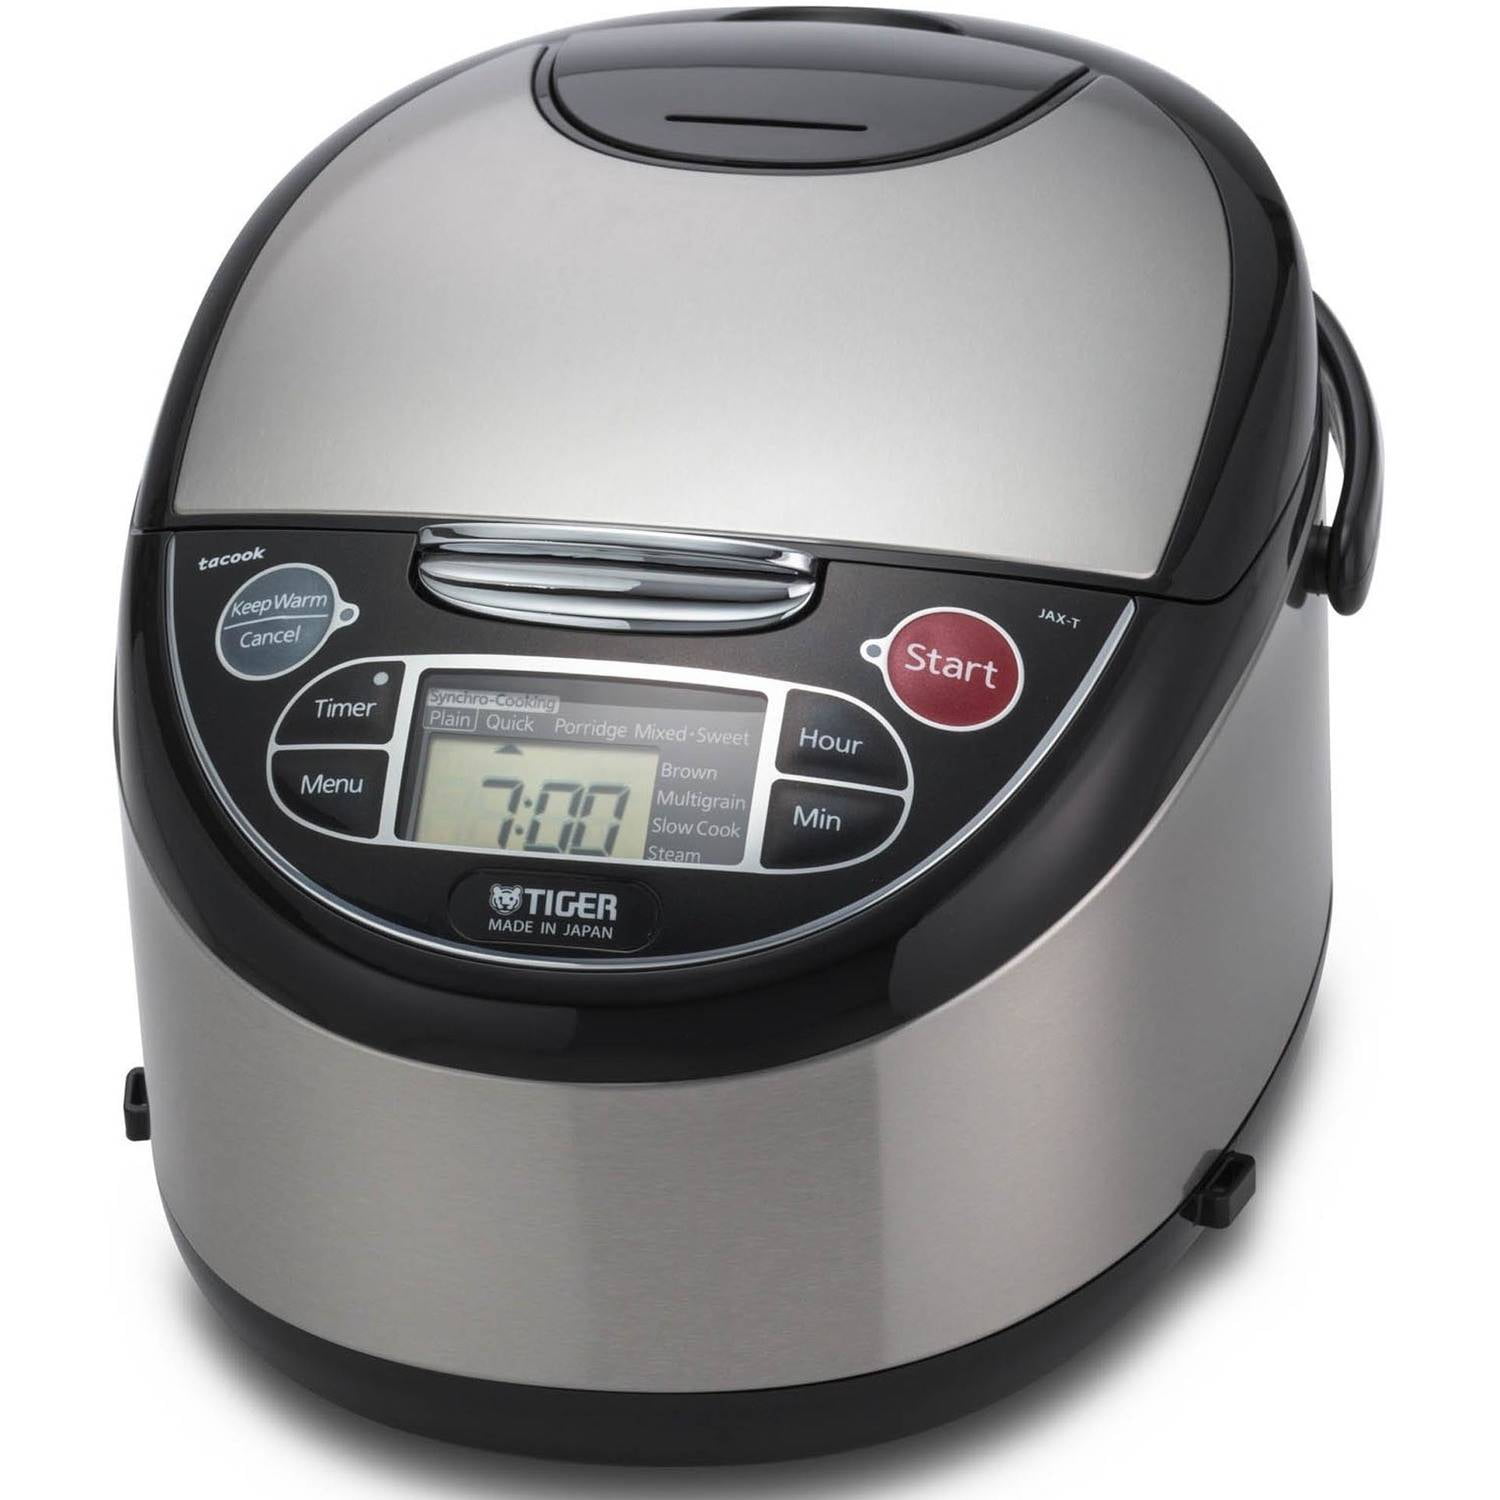 Microcomputer Controlled Rice Cooker, 5.5 Cups - Walmart.com